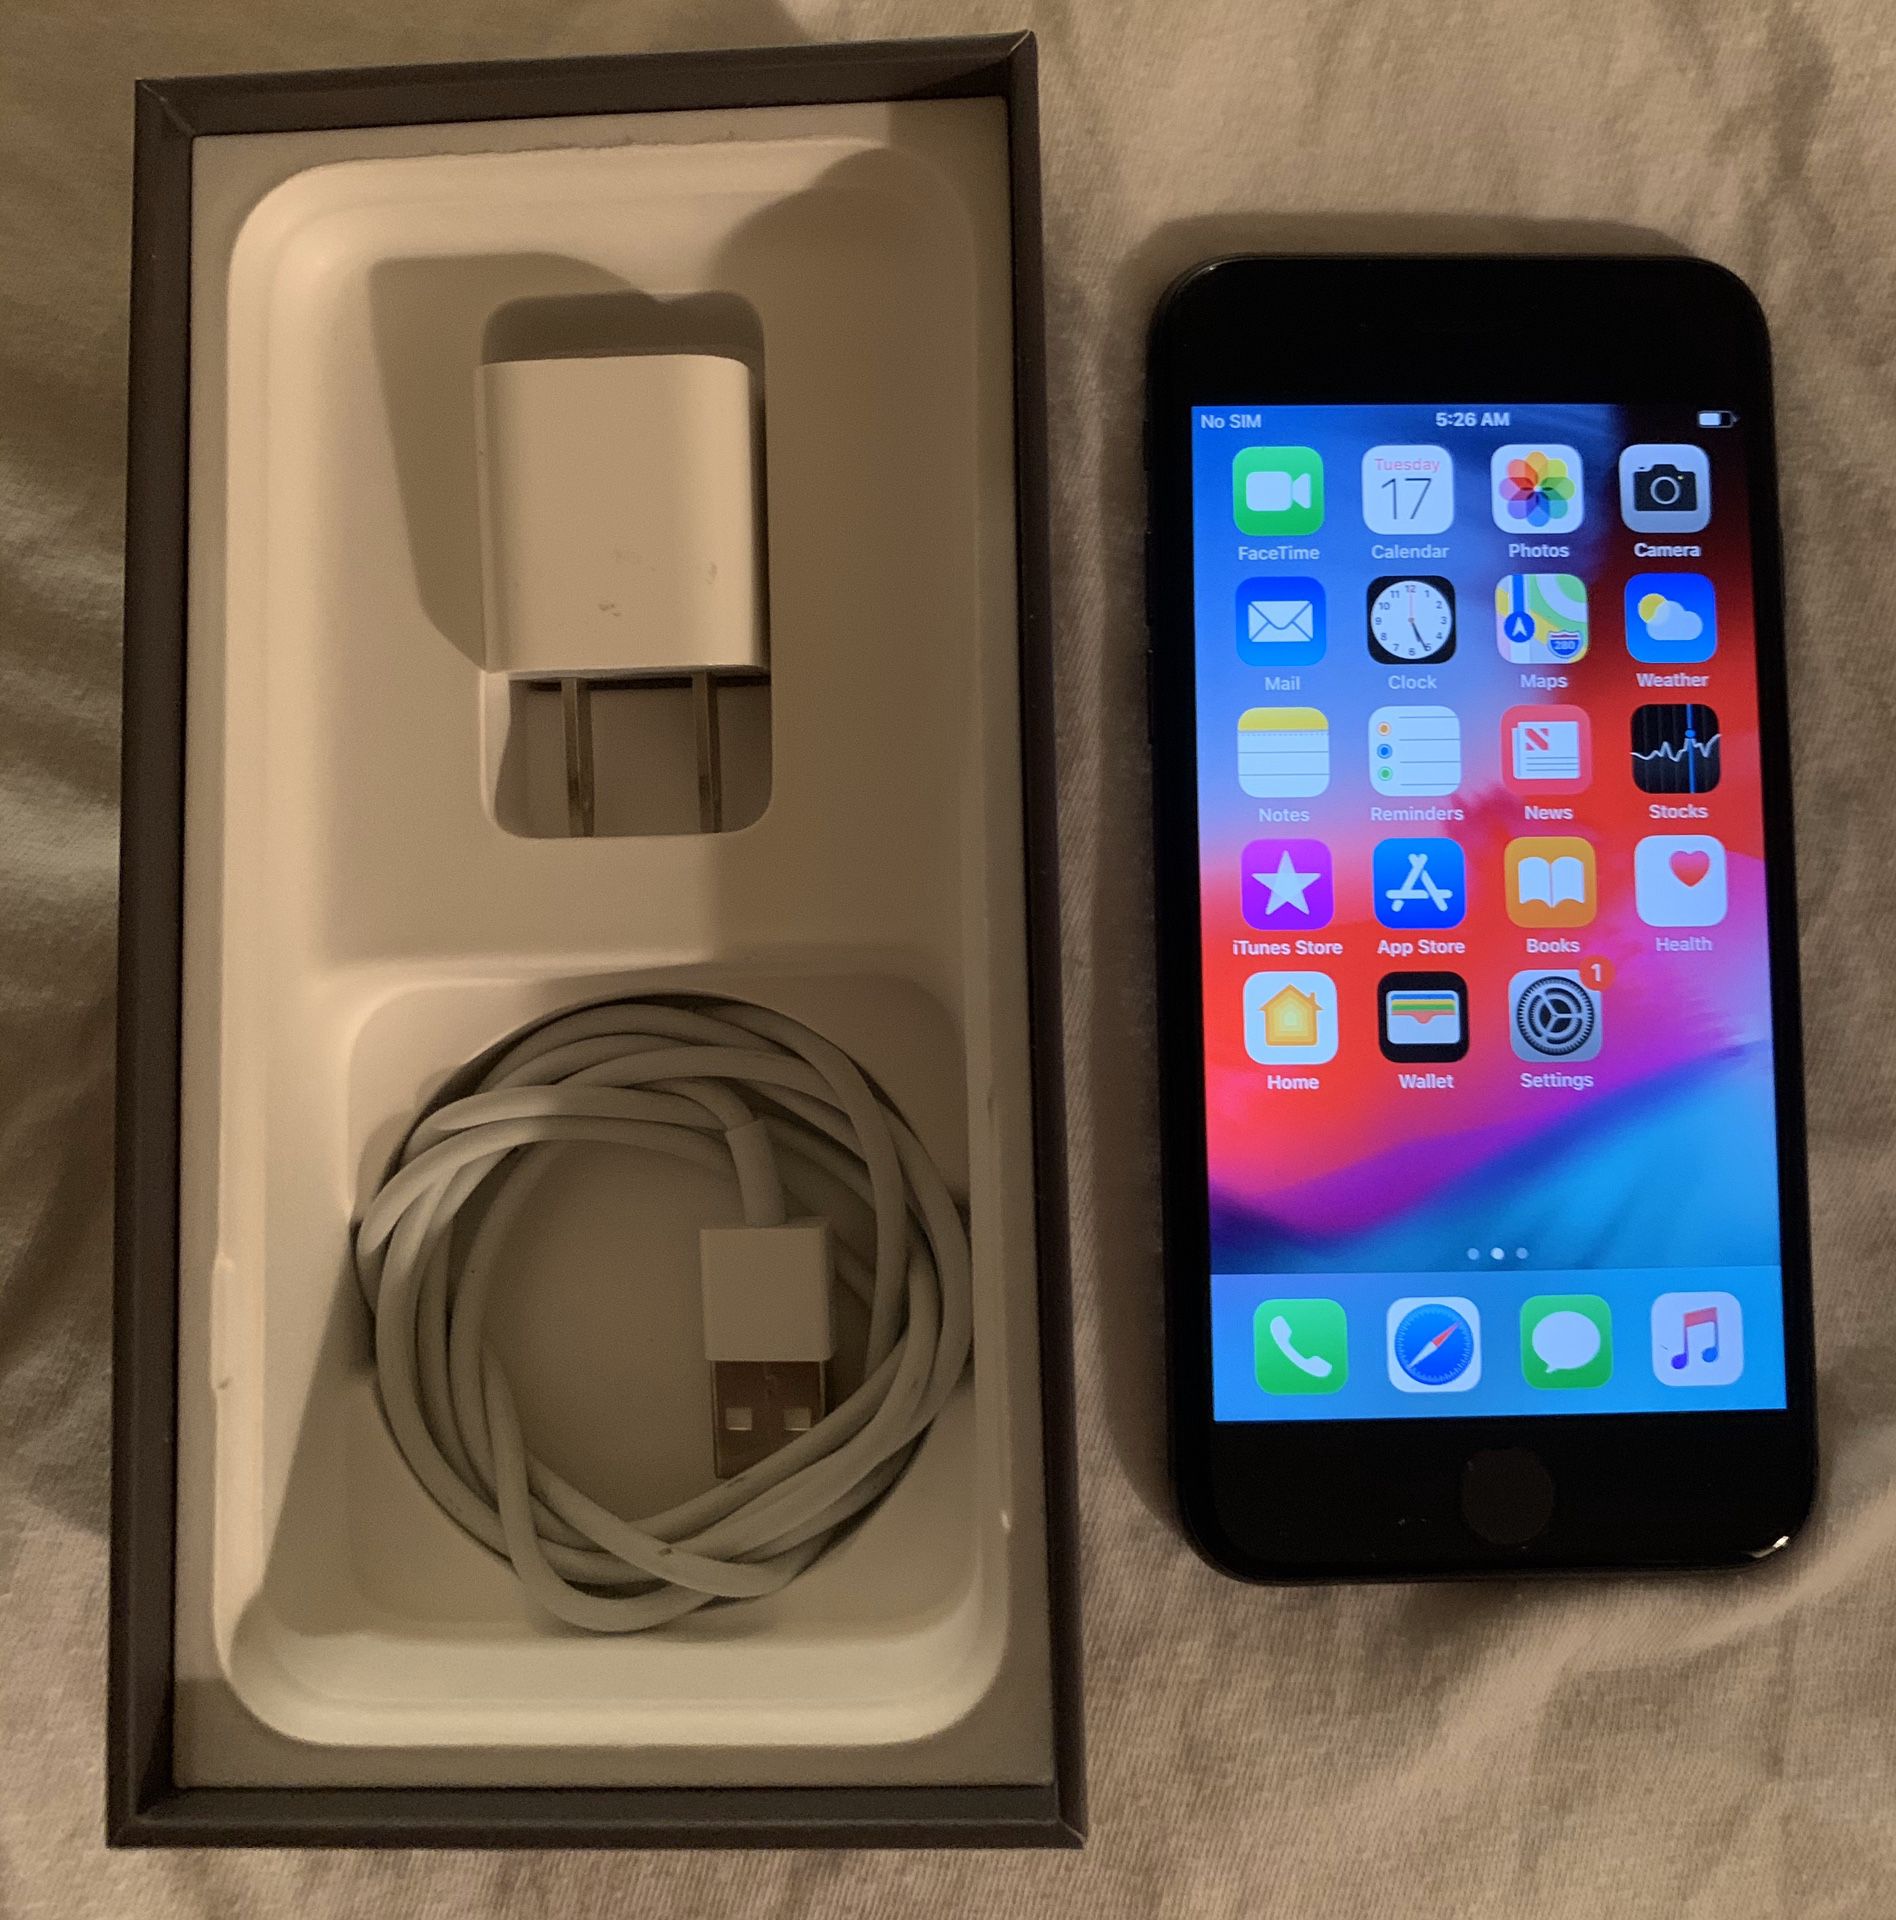 IPHONE 8 64GB (not Plus) Factory Unlocked Excellent condition, like new. Clean imei, paid in full, and ready for activation with any domestic or i